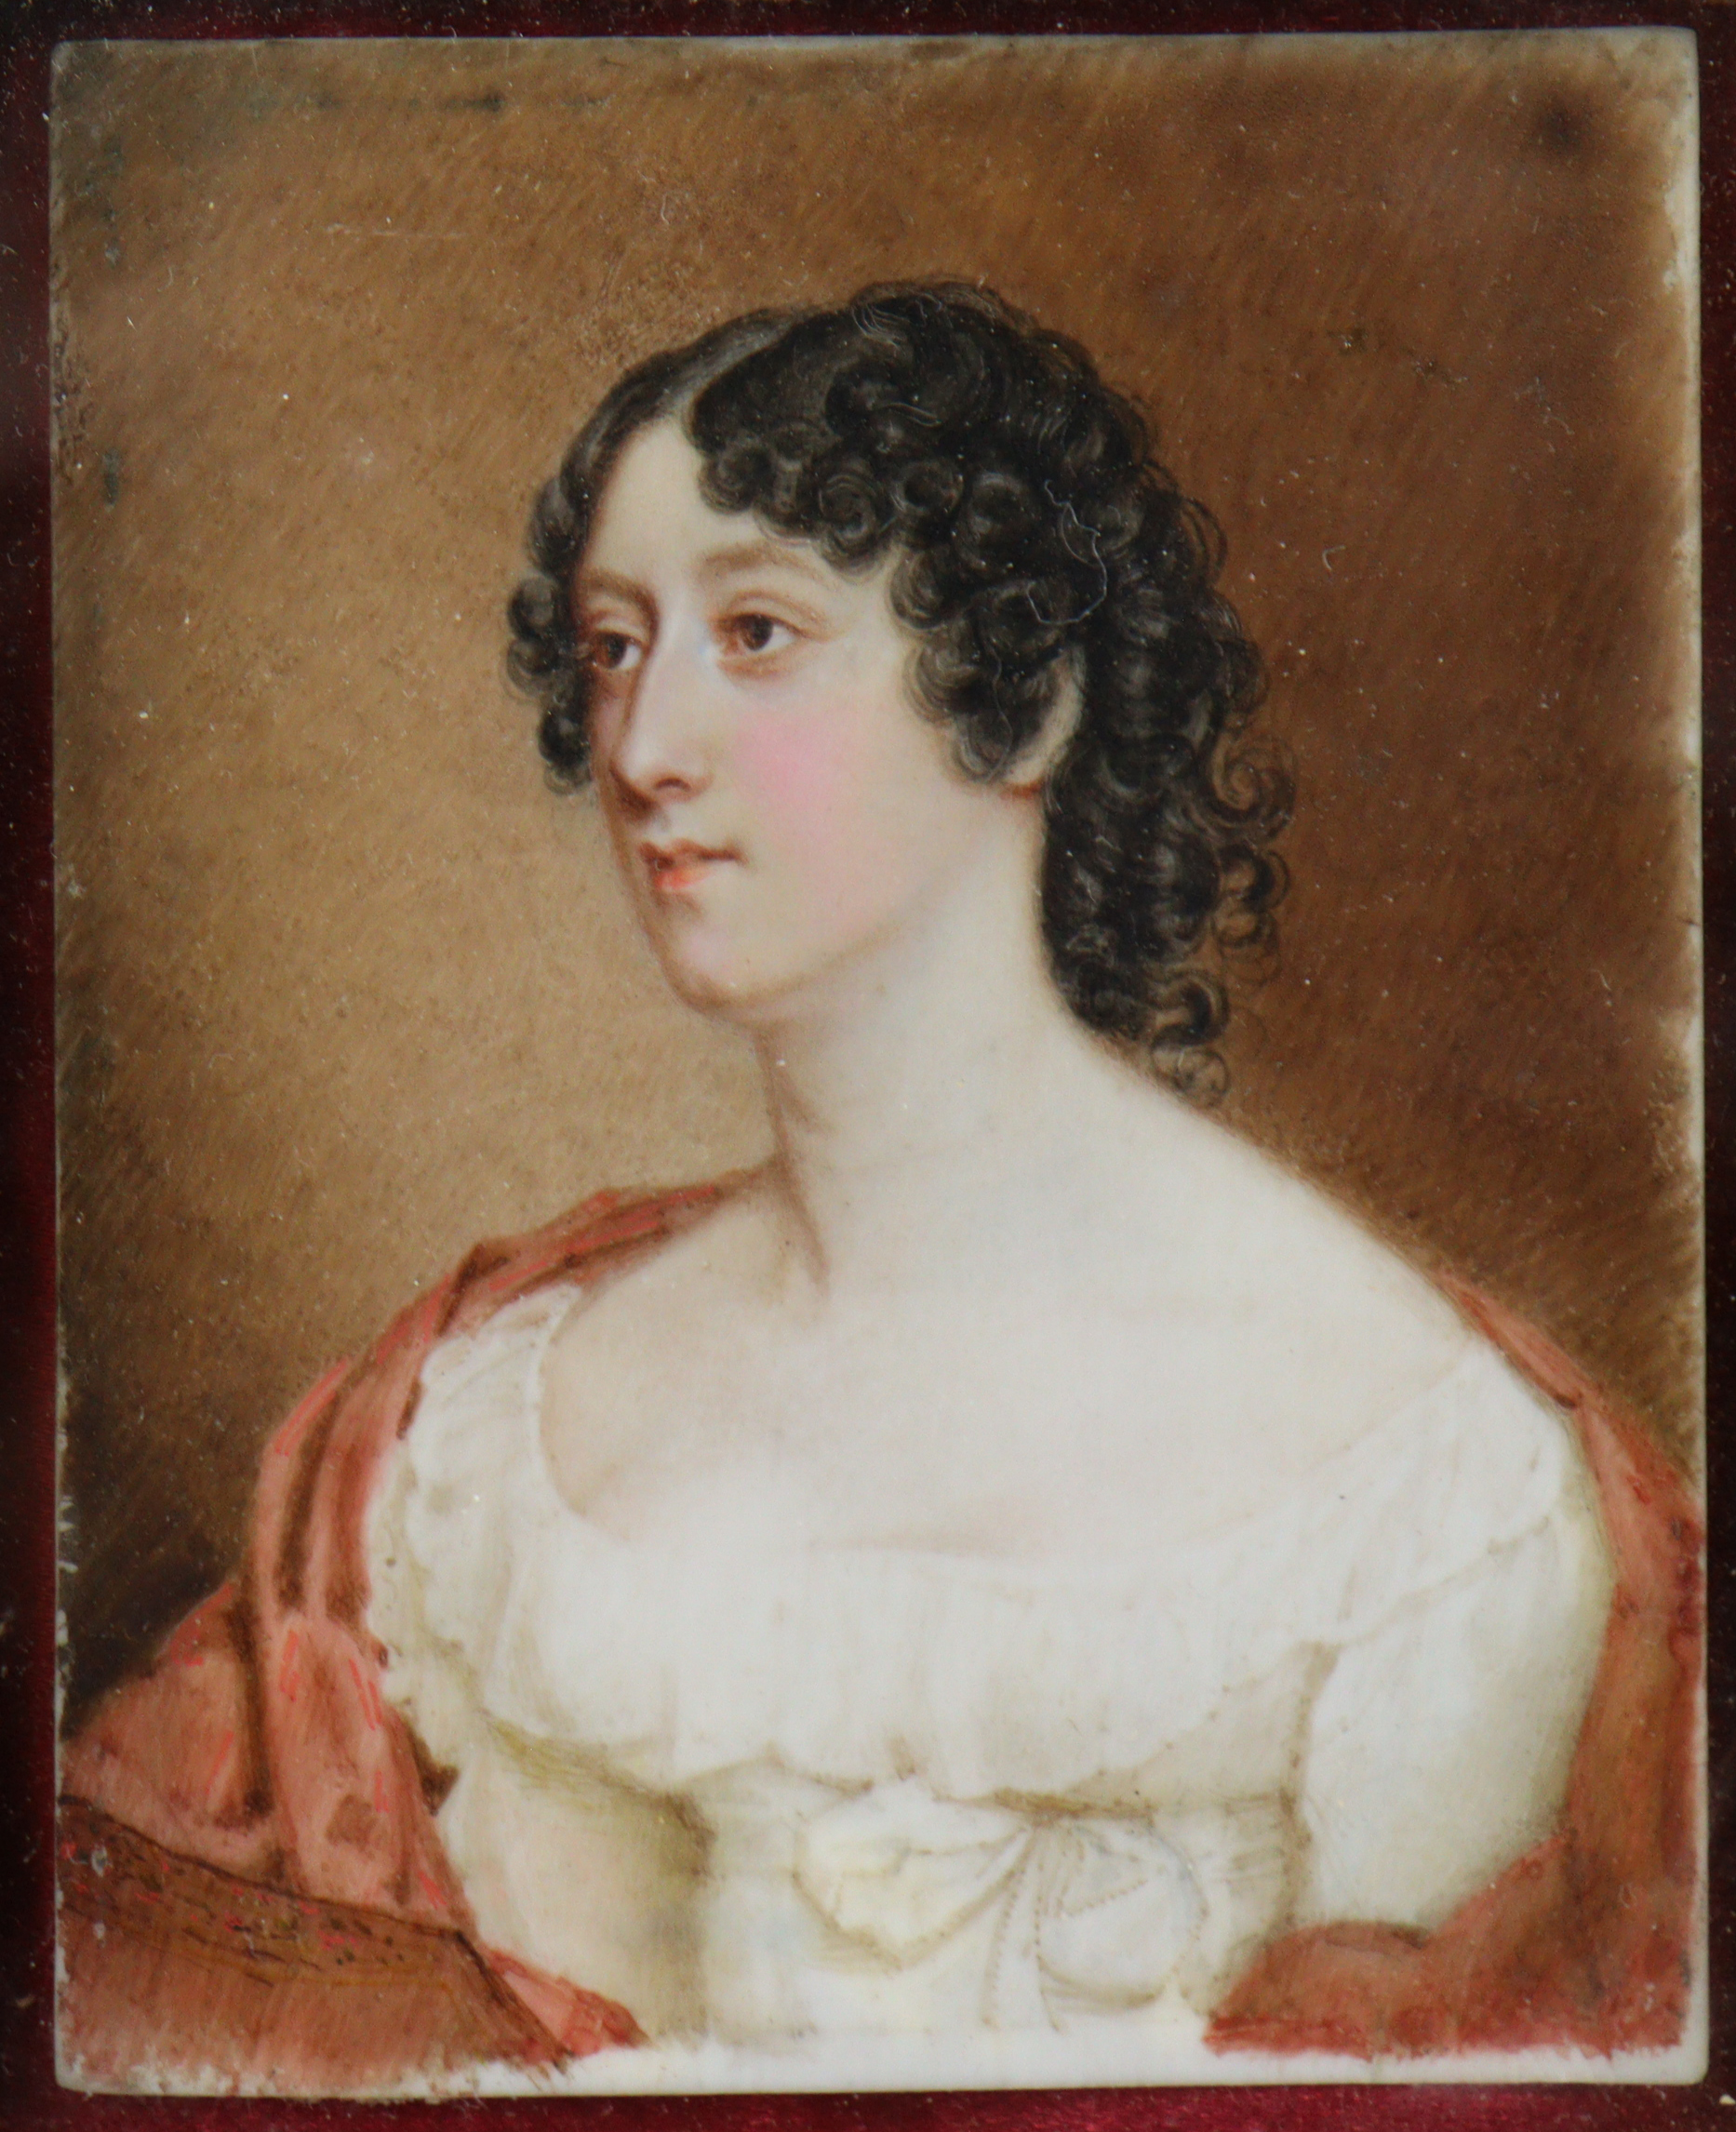 An early-mid 19th century portrait miniature of a lady, with shoulder-length curled brown hair, - Image 2 of 3